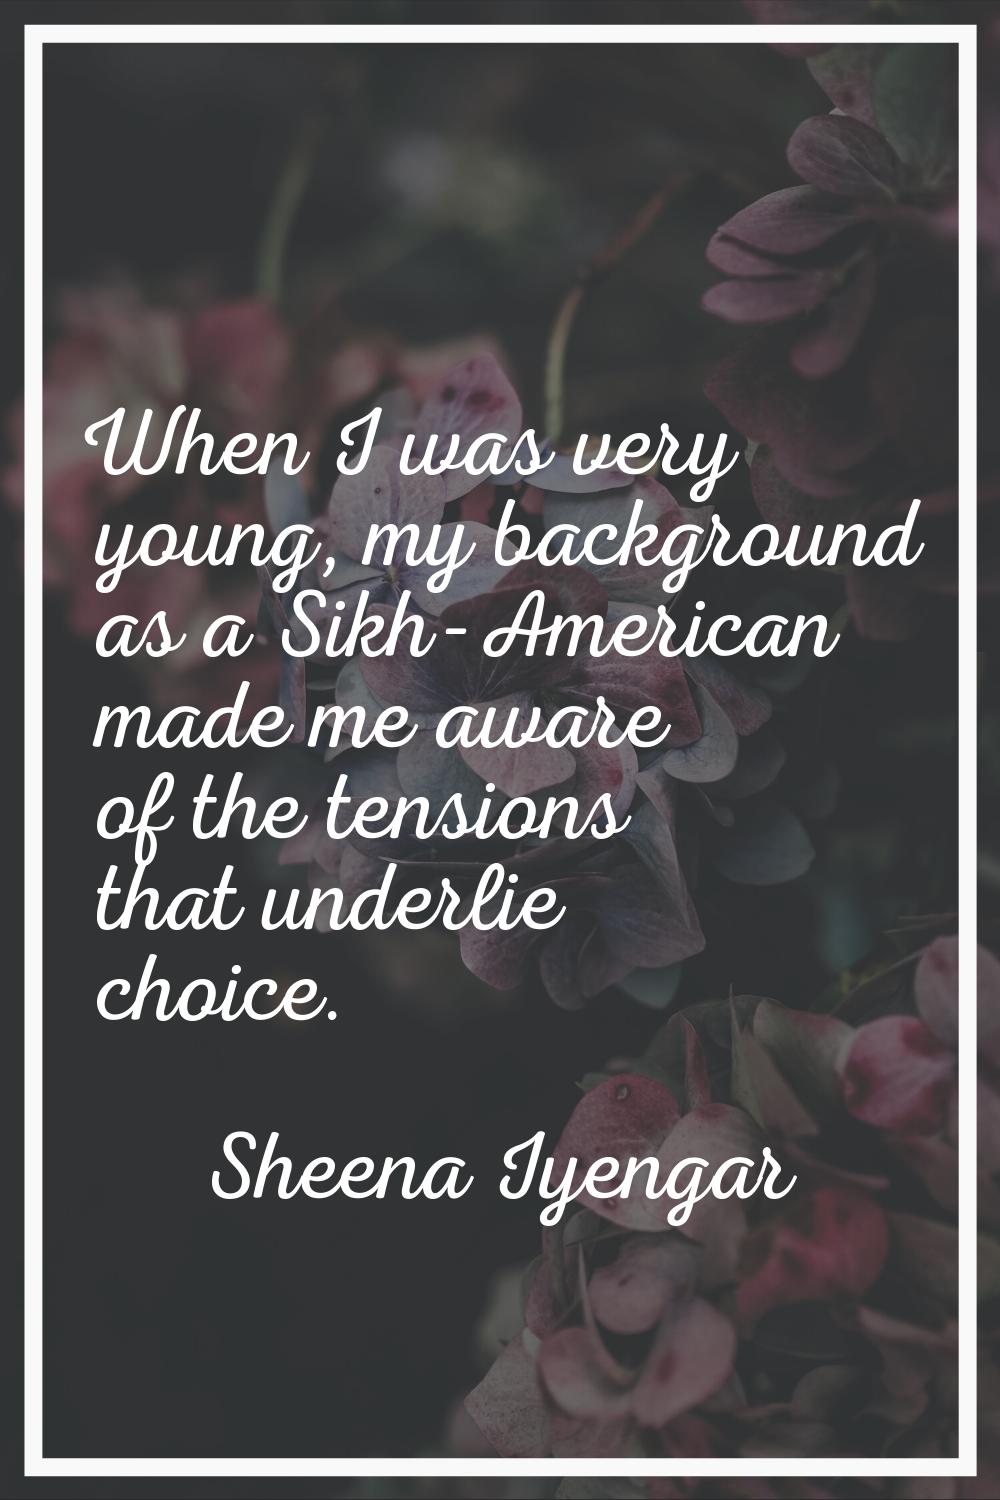 When I was very young, my background as a Sikh-American made me aware of the tensions that underlie